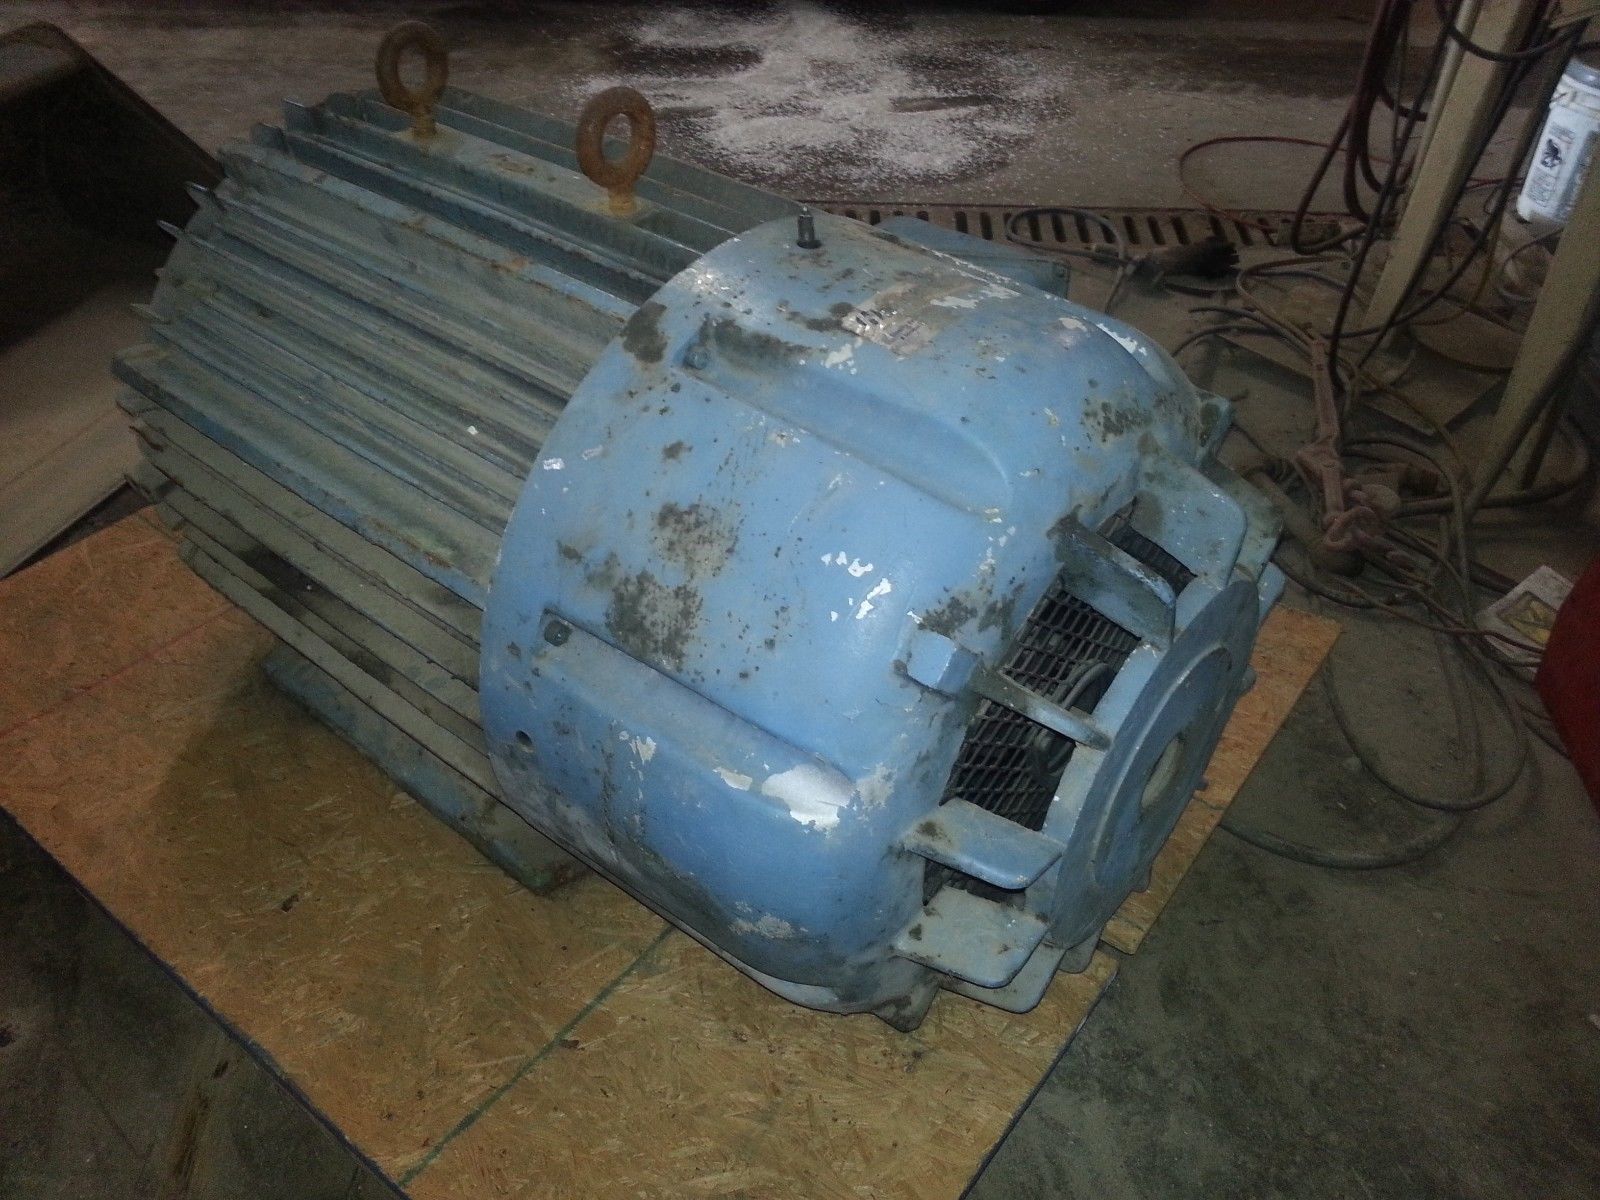 Delco Electric 100 HP Motor For Sale